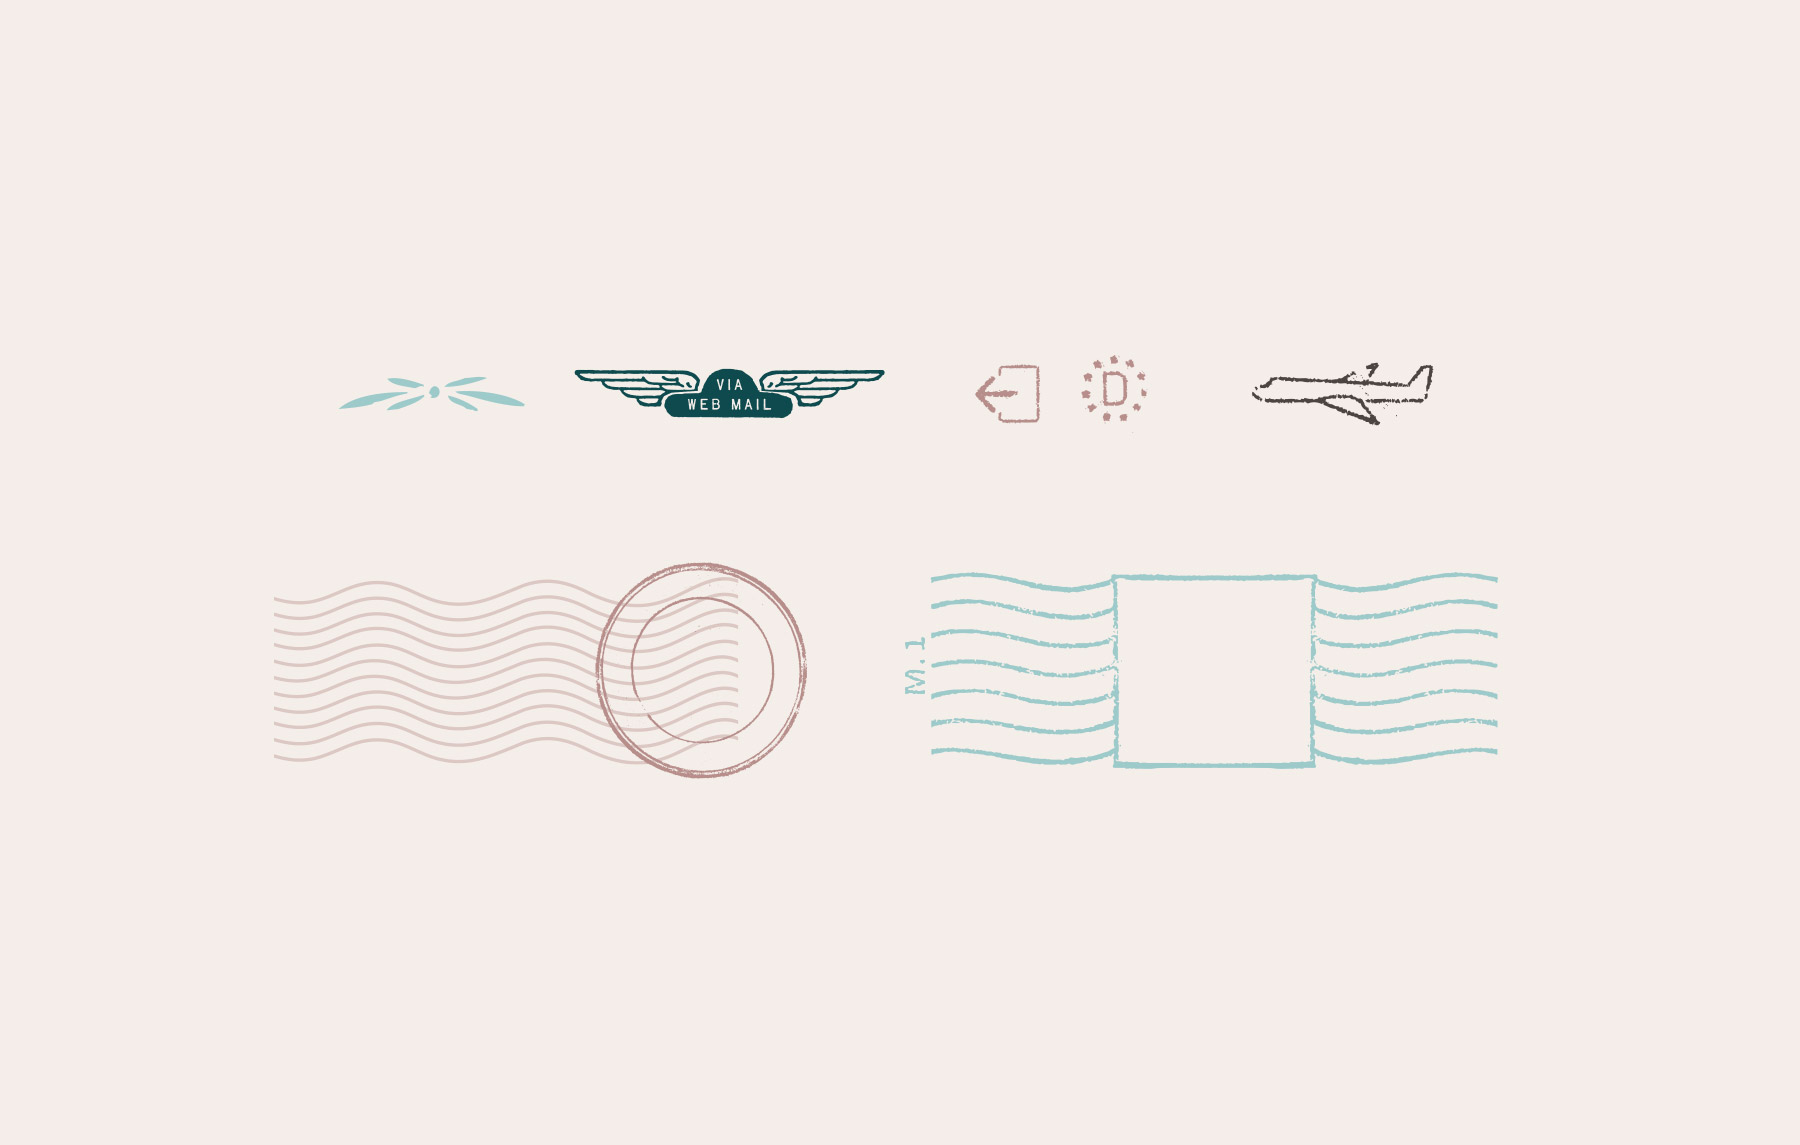 Rustic travel icons for a website